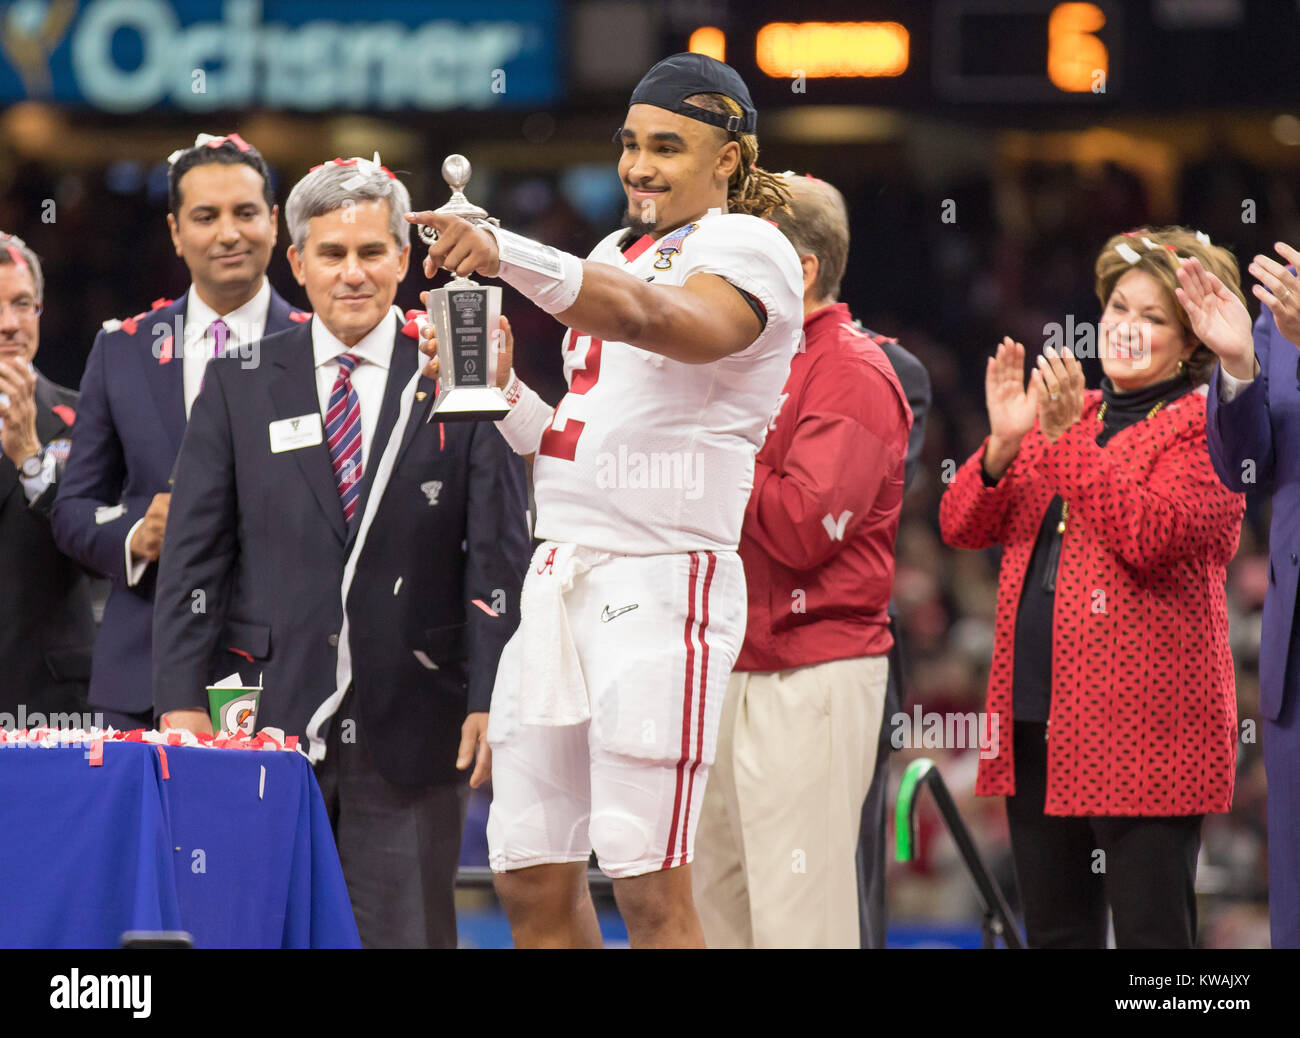 New Orleans, LA, USA. 1st Jan, 2018. Offensive player of the game Jalen Hurts #2 during the awards ceremony of the Allstate Sugar Bowl football game between the Clemson Tigers and the Alabama Crimson Tide at the Mercedes-Benz Supedome in New Orleans, LA. Kyle Okita/CSM/Alamy Live News Stock Photo